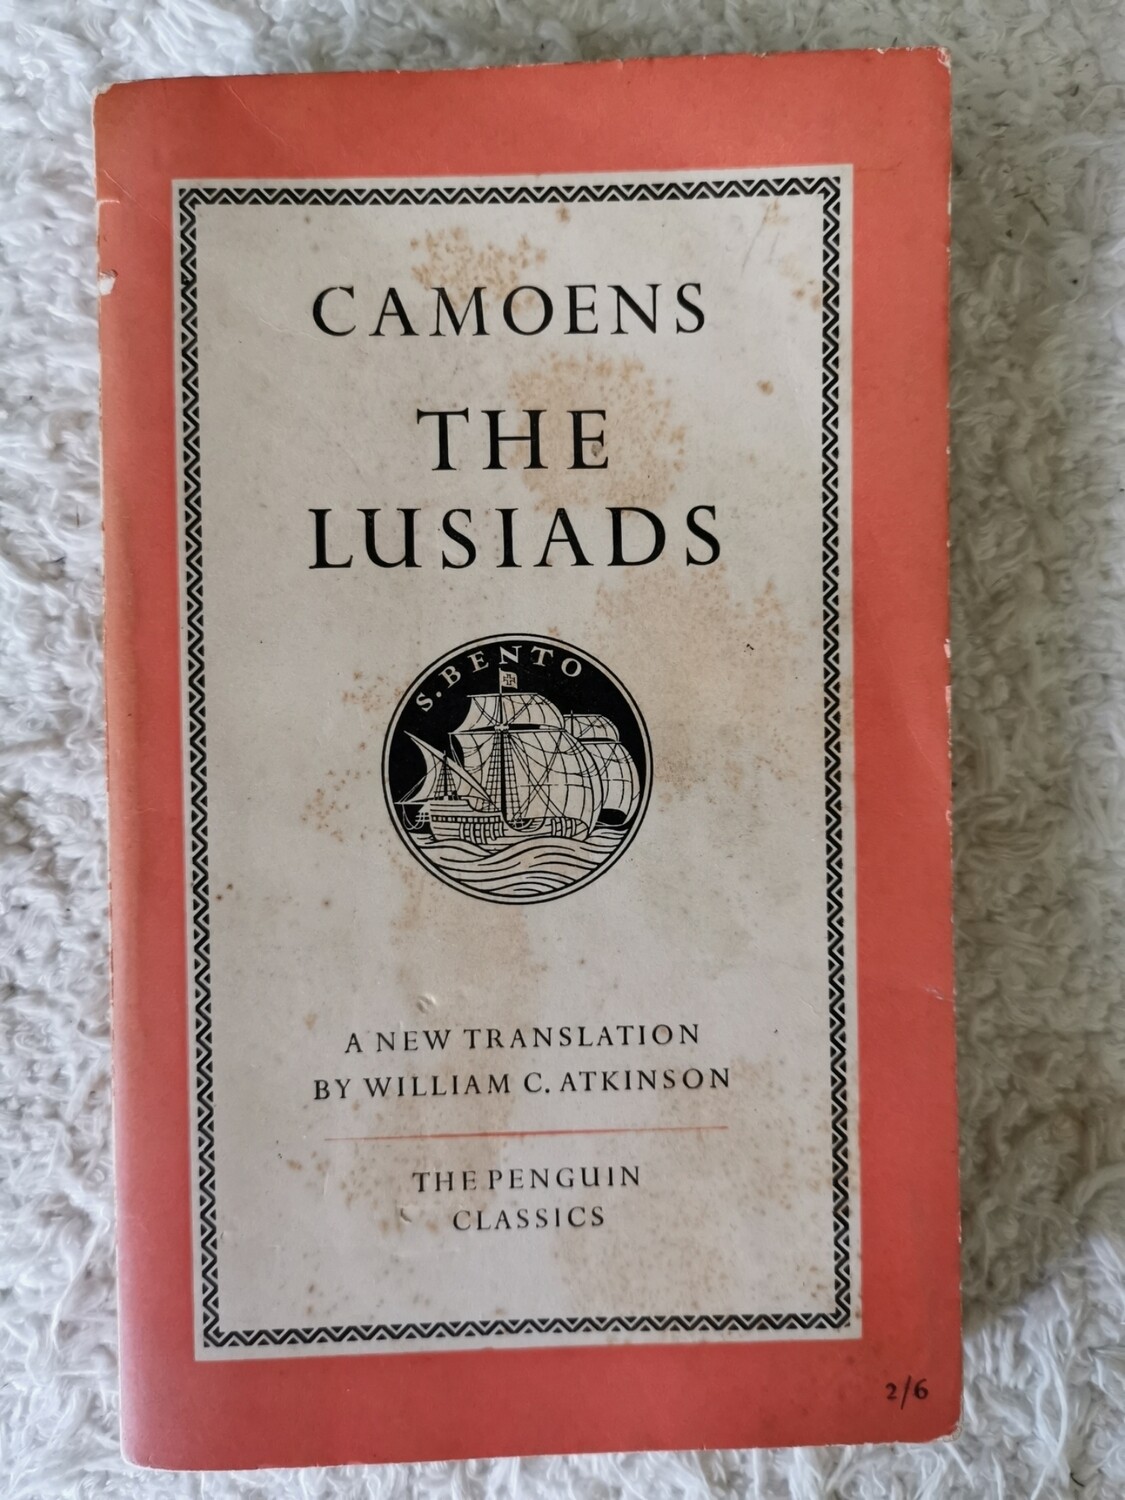 Camoens The Luciads